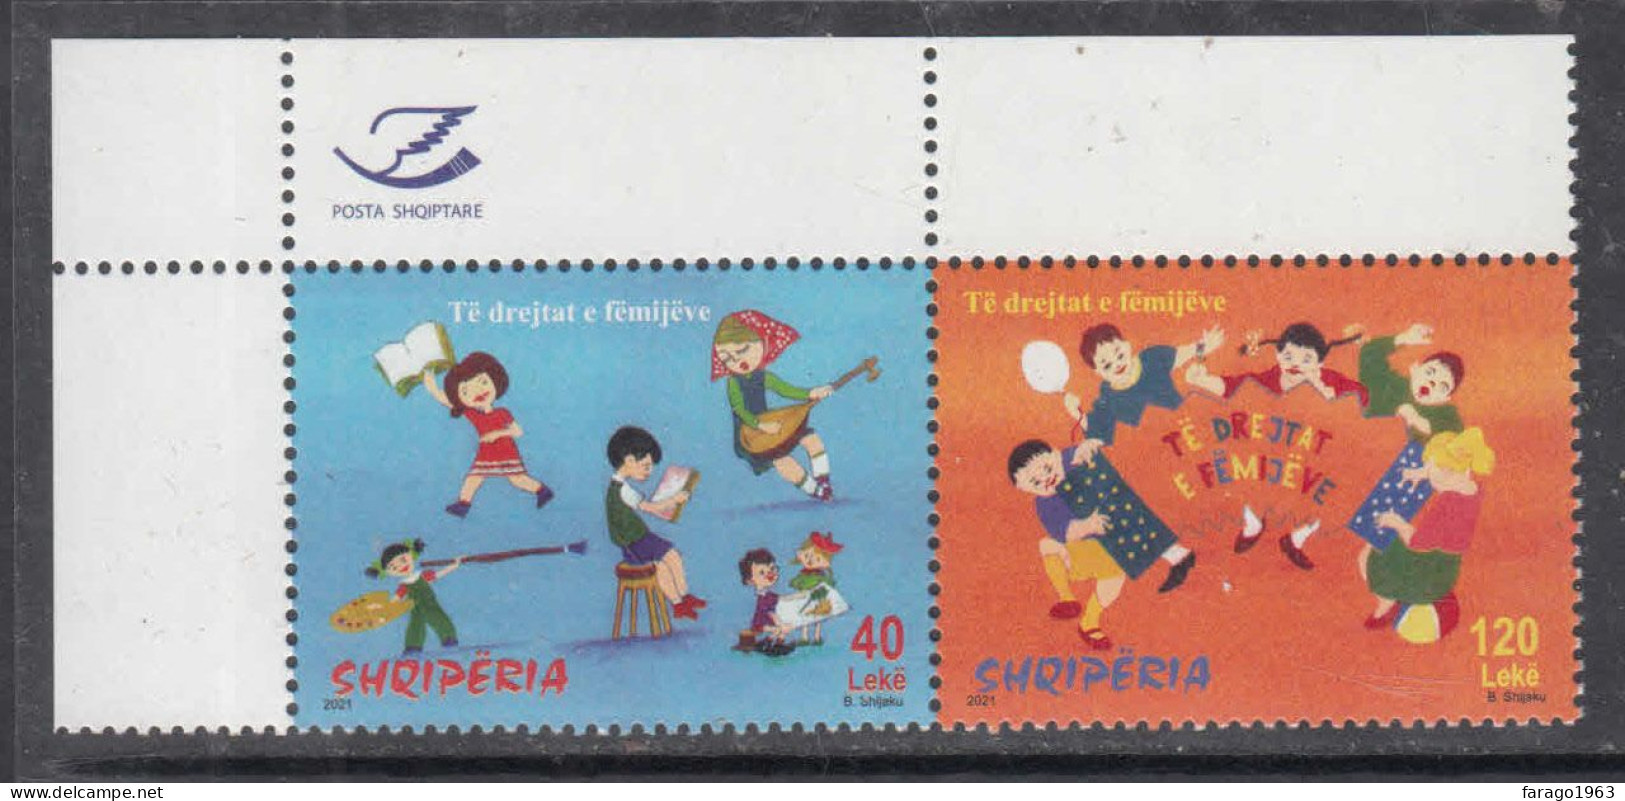 2021 Albania Children's Rights Games Toys Complete Pair MNH @ BELOW FACE VALUE - Albanie